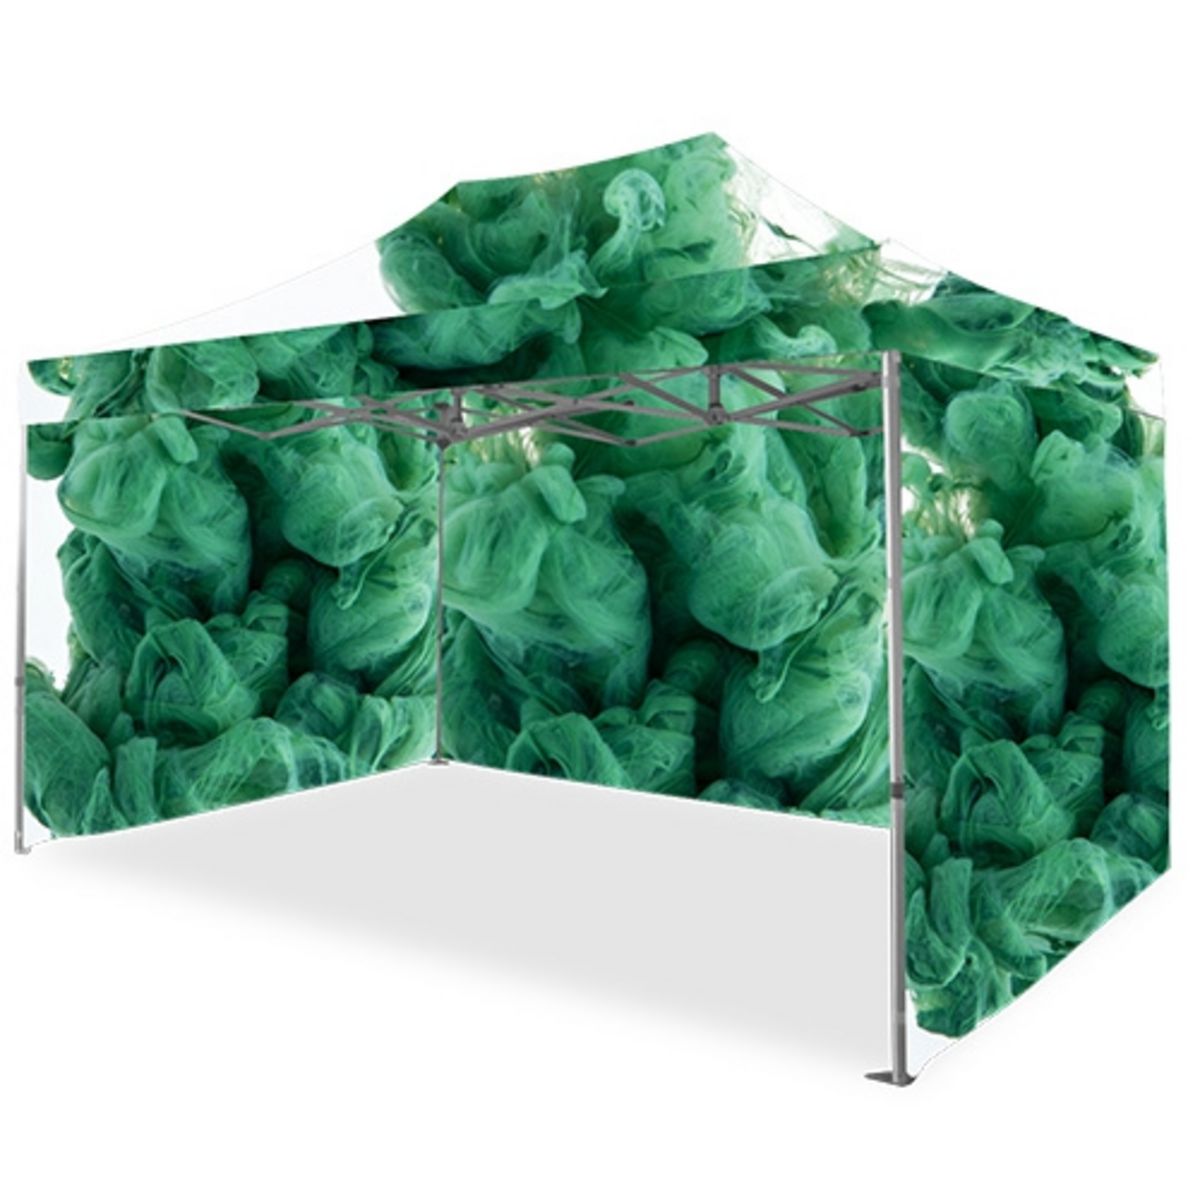 3m x 6m Custom Printed Branded Promotional Tent Gazebo With Full Side and Back Walls.jpg